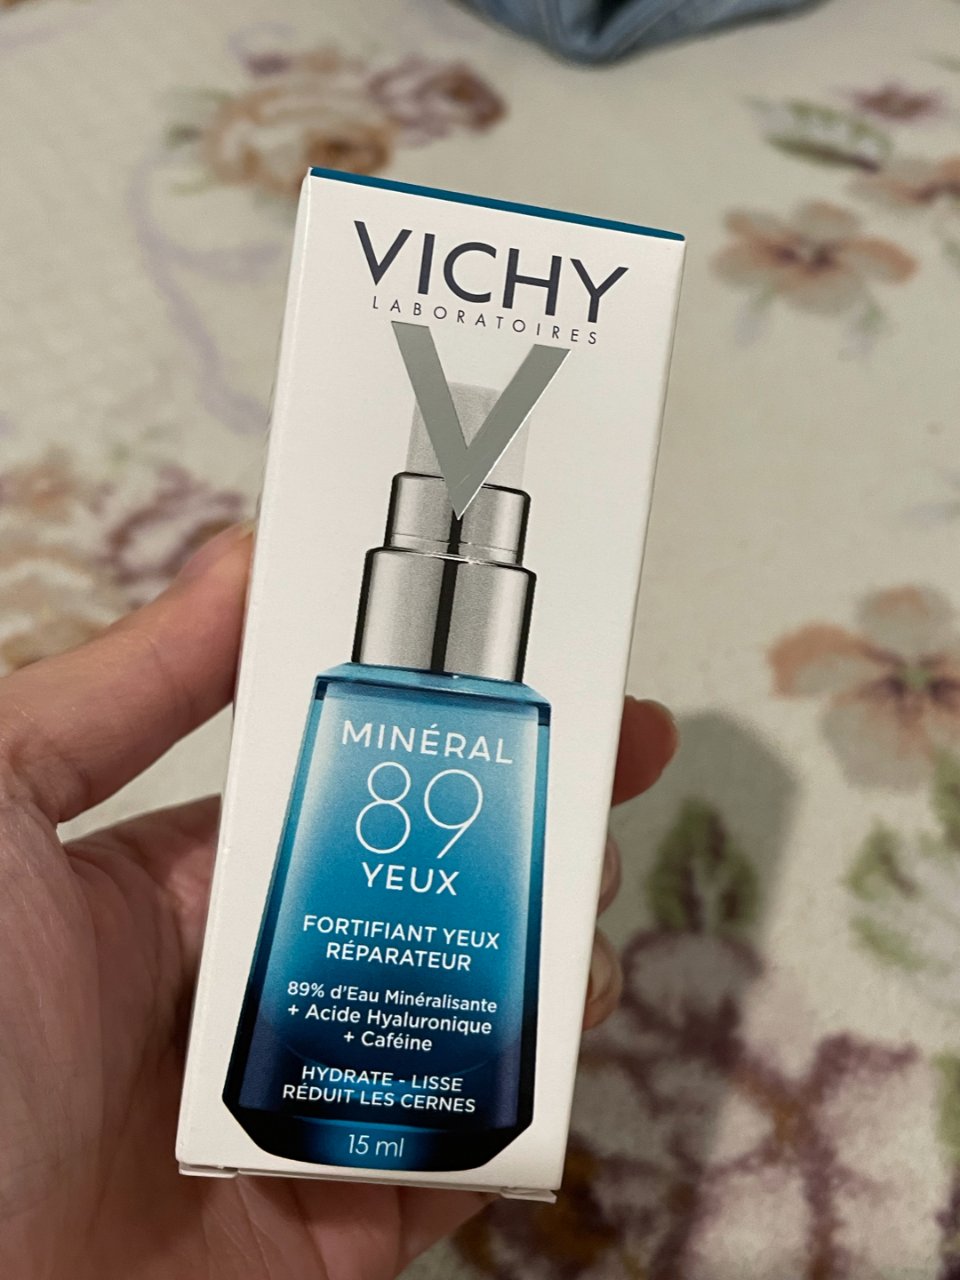 Vichy Minéral 89 Eyes with Hyaluronic Acid + Caffeine 15ml - Boots,Vichy 薇姿